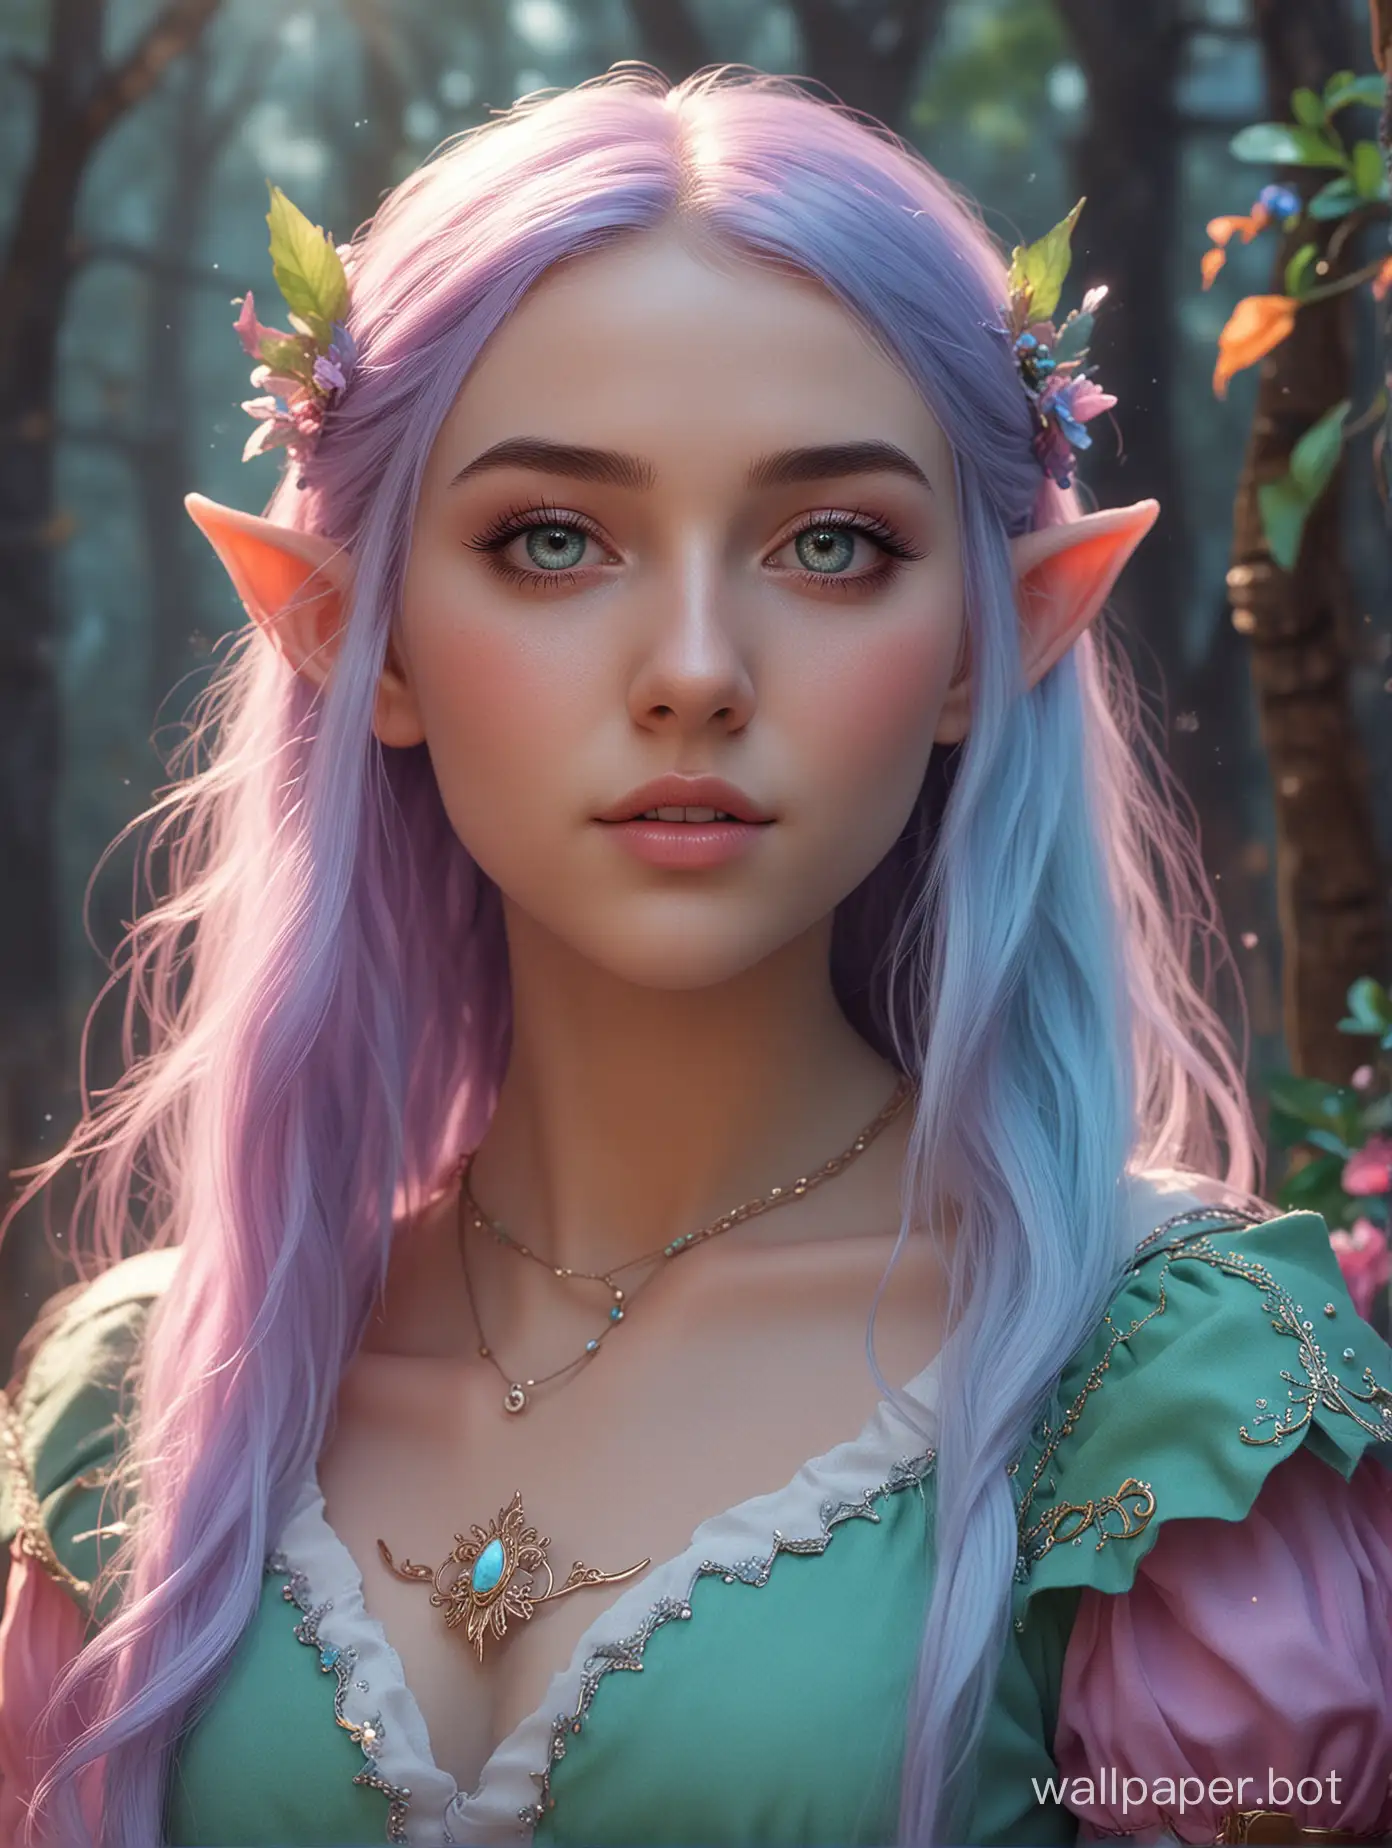 imagine a  fantastic scene of 21 year old female elf in it's element , use your unbounded creativity to create a magical realm of vibrant pastels and colors ,cinematic